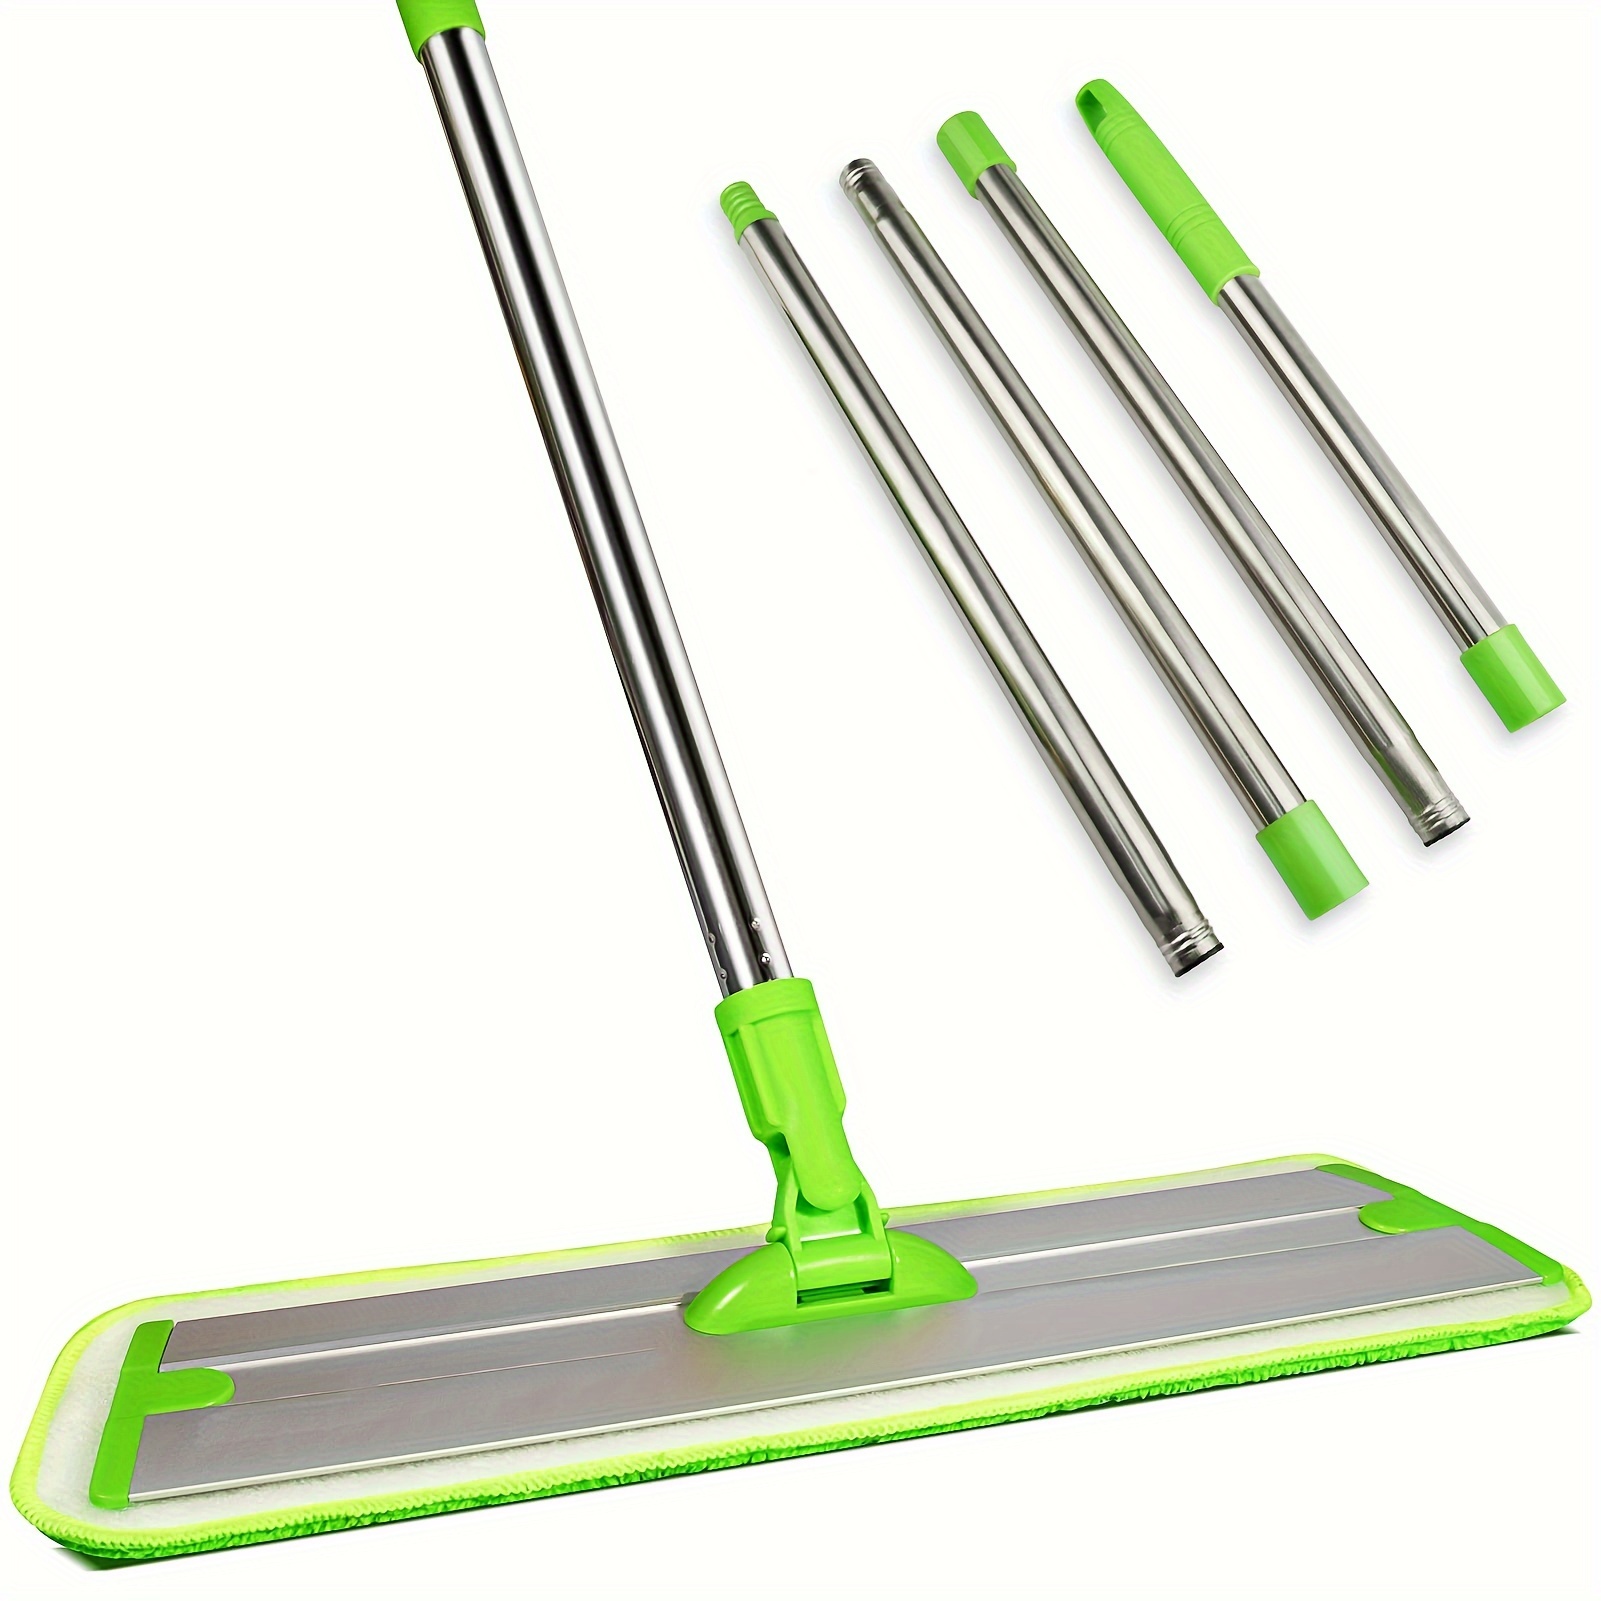  MR.SIGA Professional Microfiber Mop for Hardwood, Laminate,  Tile Floor Cleaning, Stainless Steel Handle - 3 Reusable Flat Mop Pads and  1 Dirt Removal Scrubber Included : Health & Household